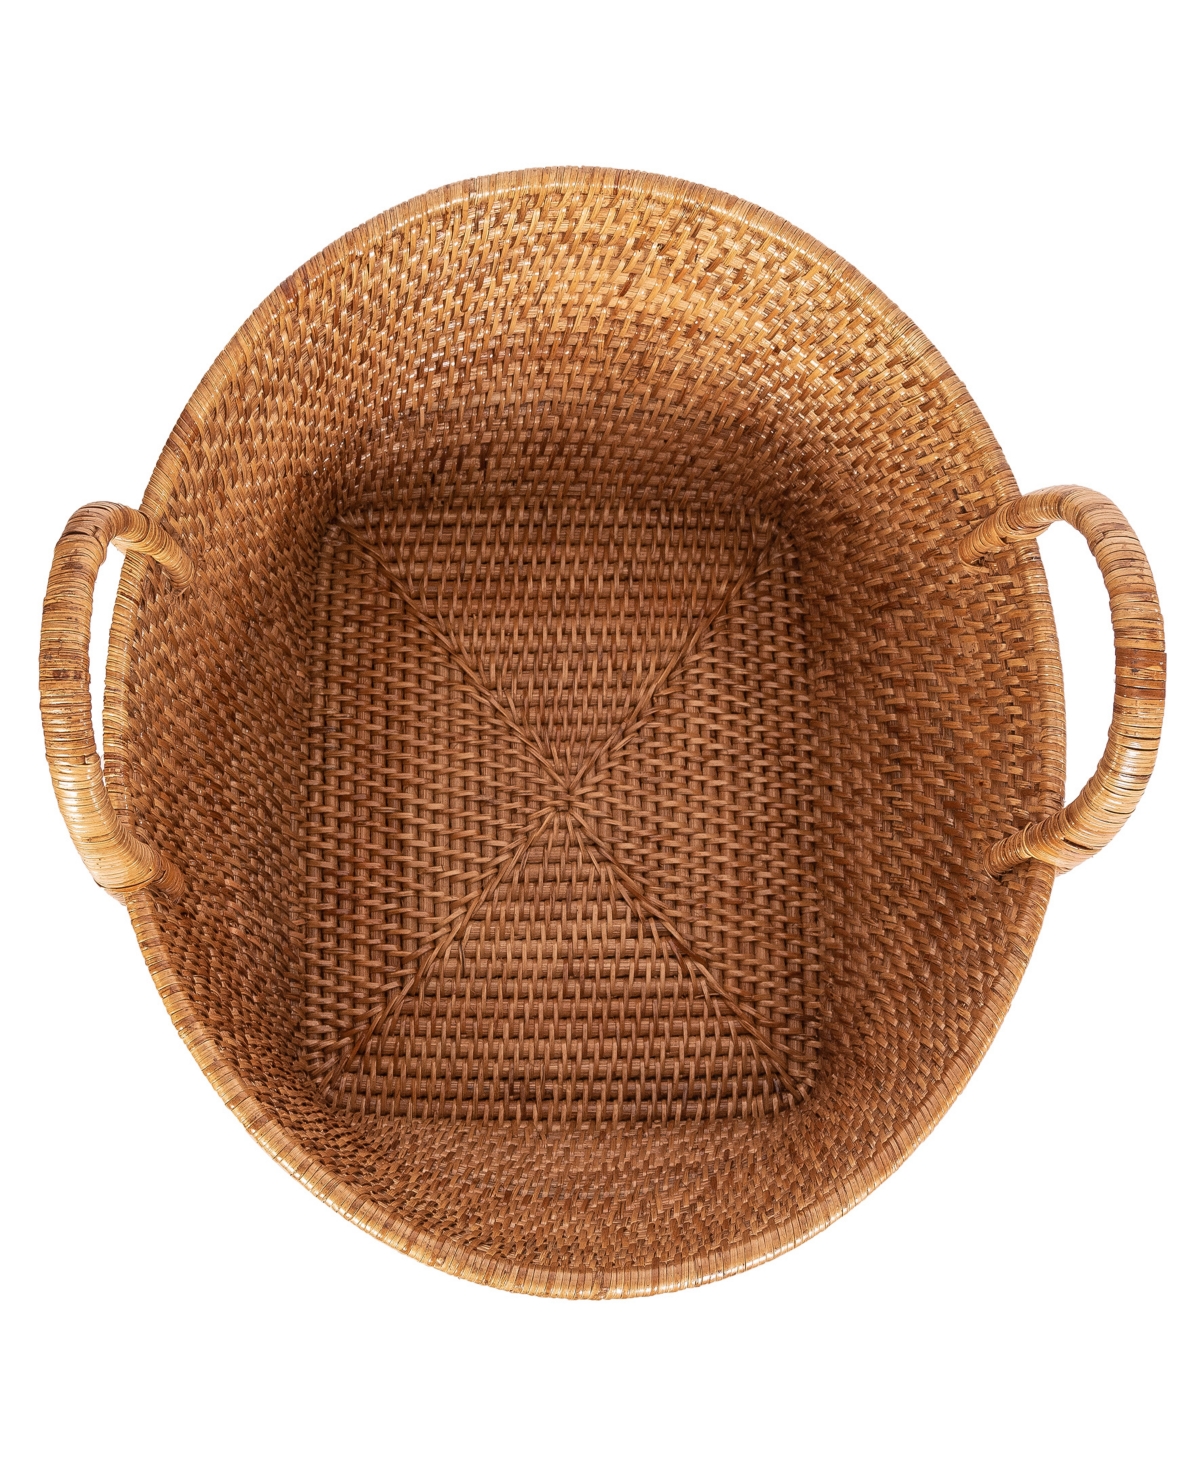 Artifacts Trading Company Saboga Home Round Basket With Hoop Handles In Honey Brown